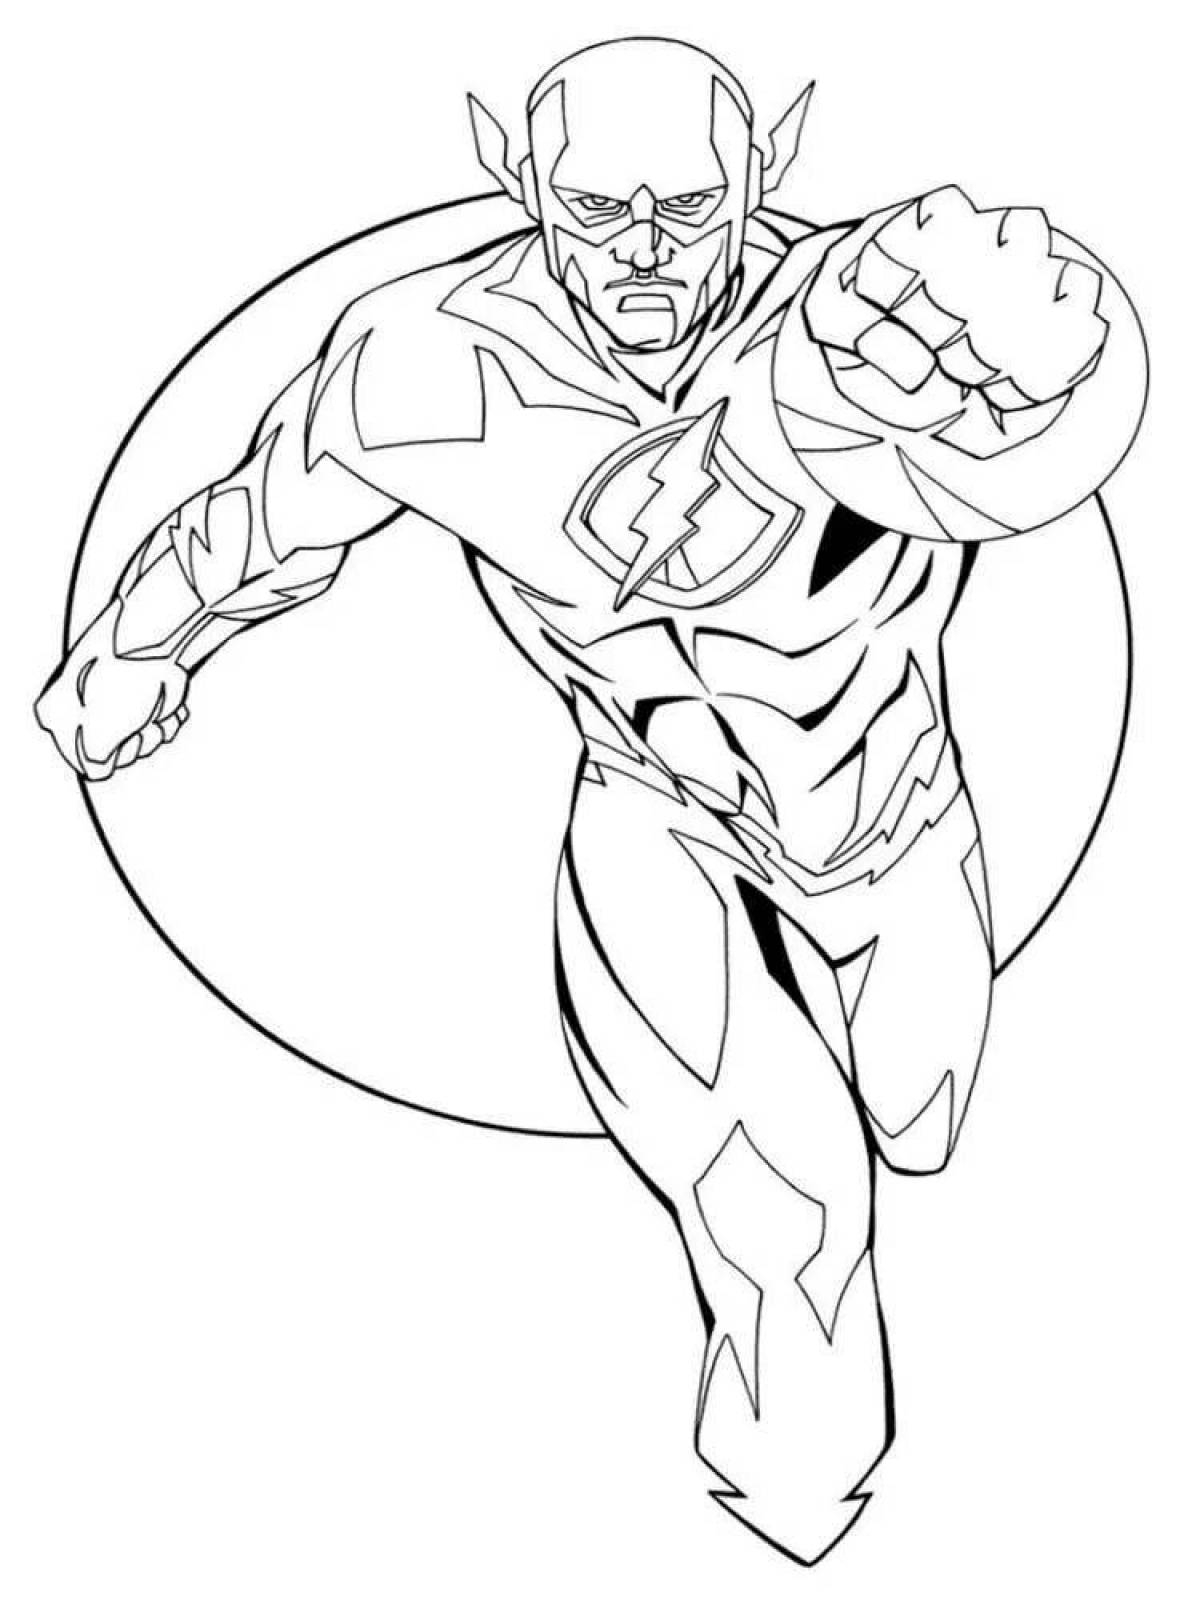 Radiant flush coloring page